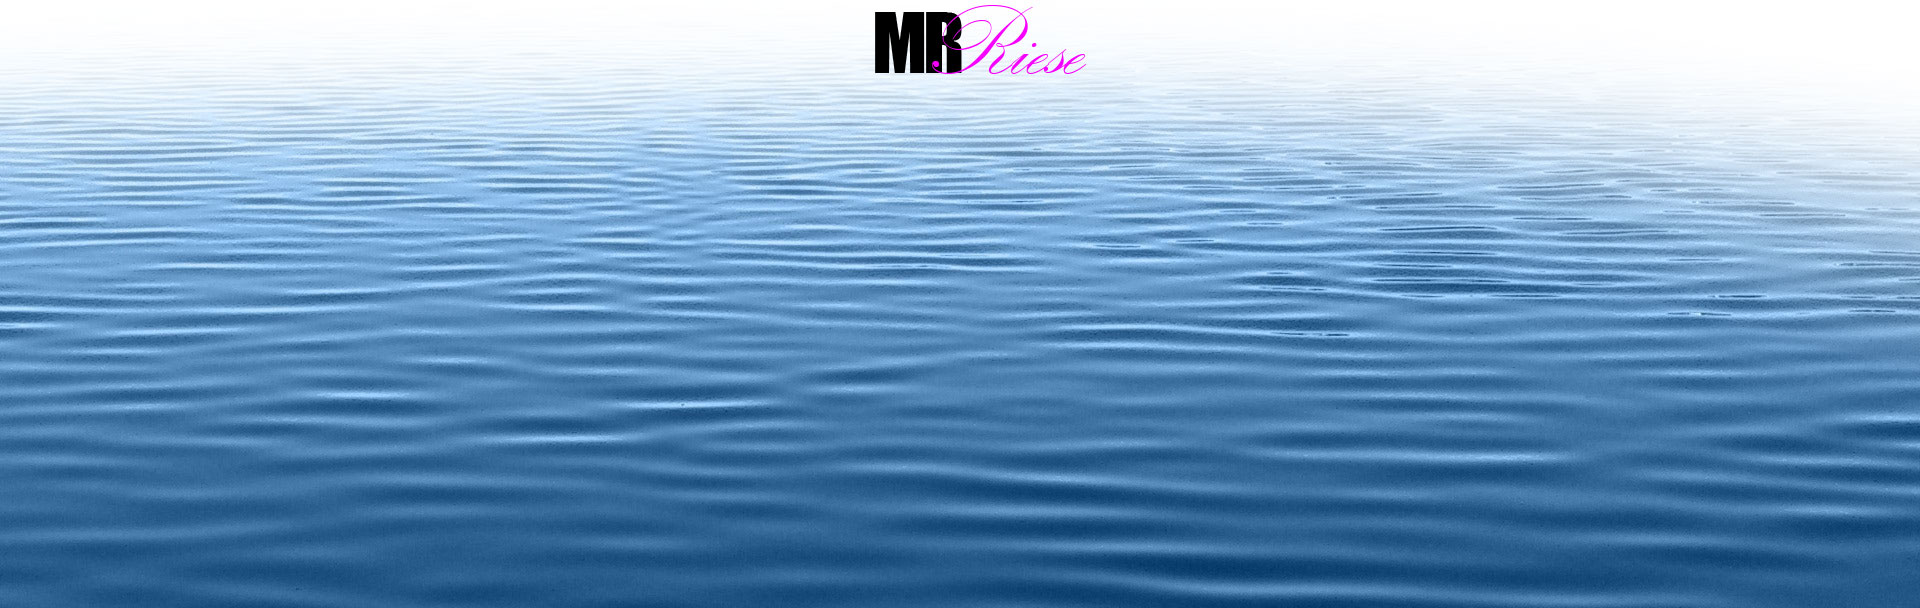 Water Portrait Photoshop Project | Mr. Riese